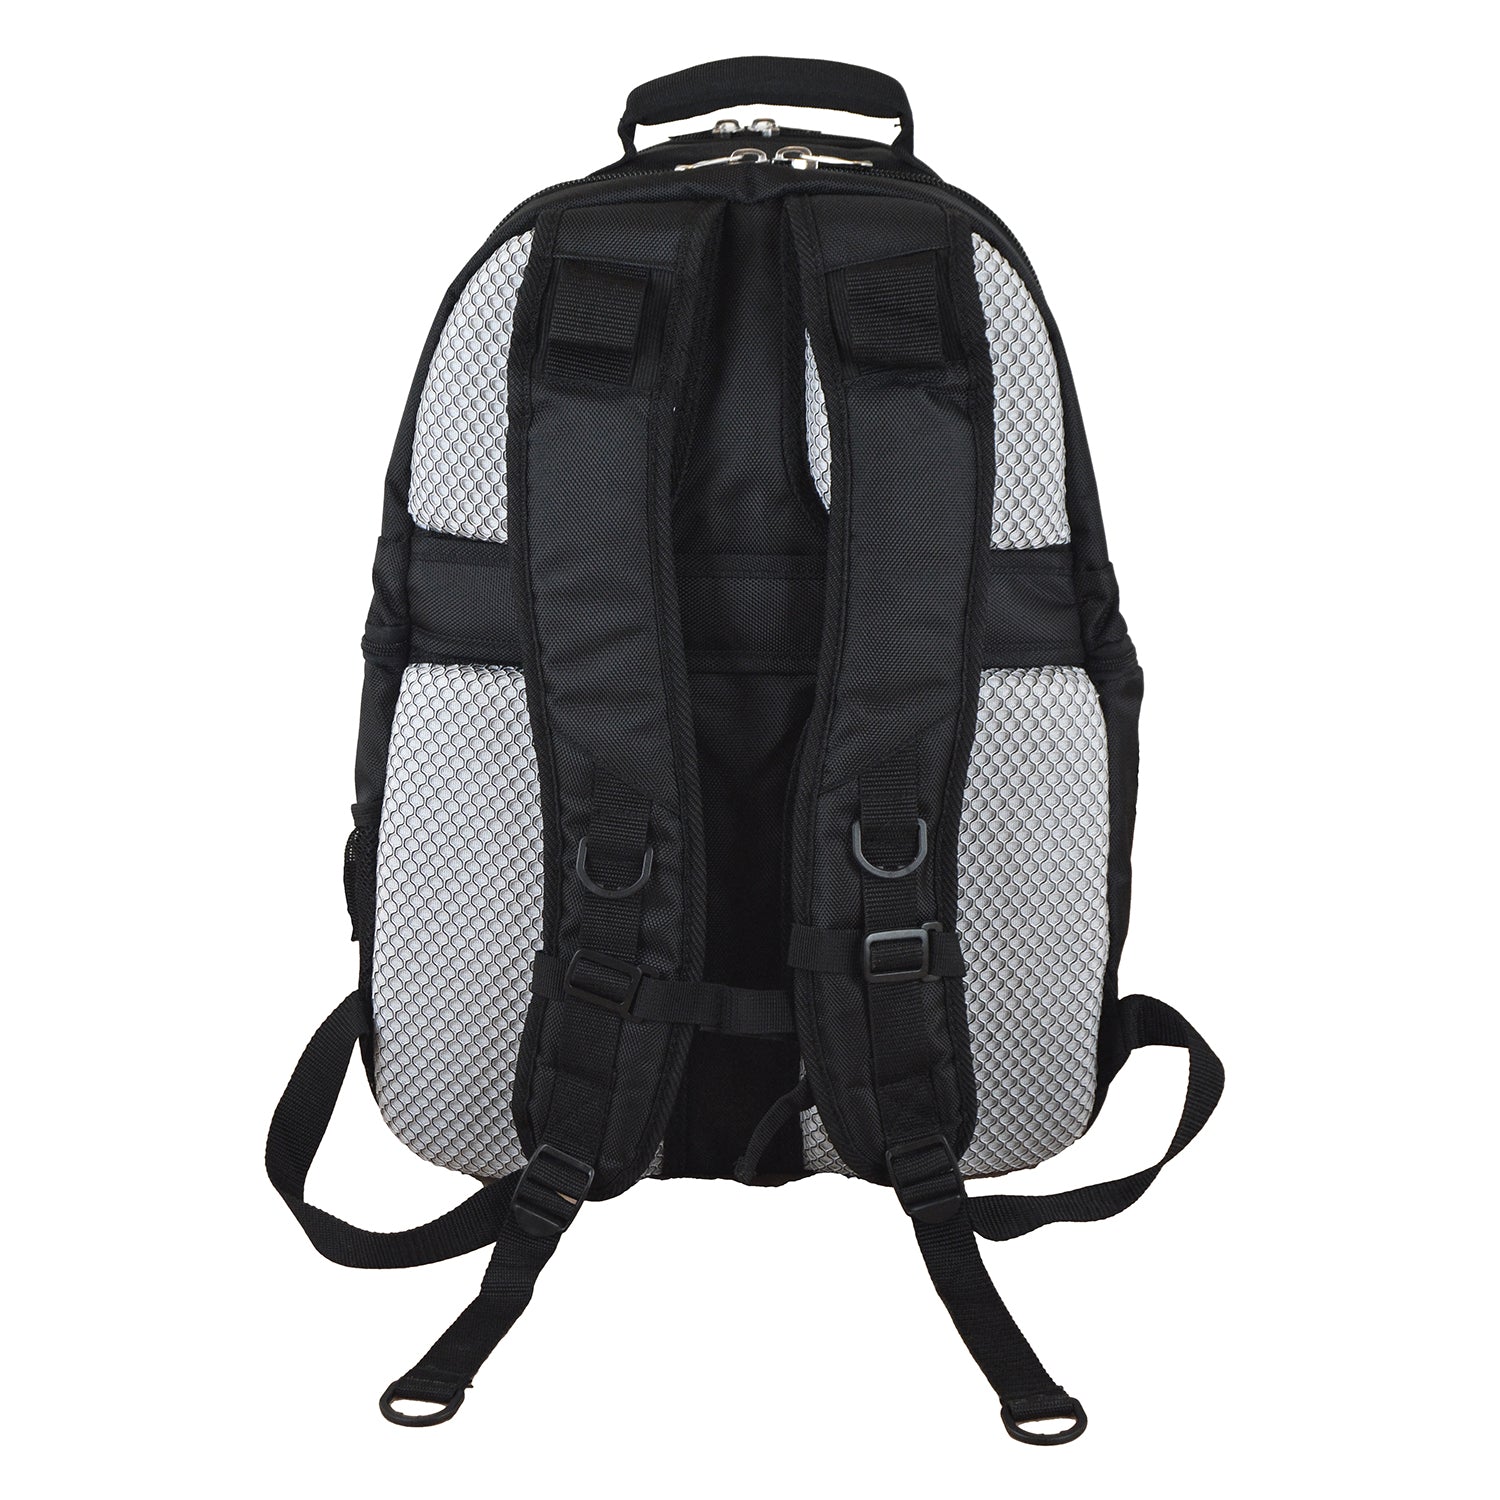 Columbia Unisex Trail Elite Lumbar Bag, Black/Shark, One Size : Buy Online  at Best Price in KSA - Souq is now Amazon.sa: Sporting Goods